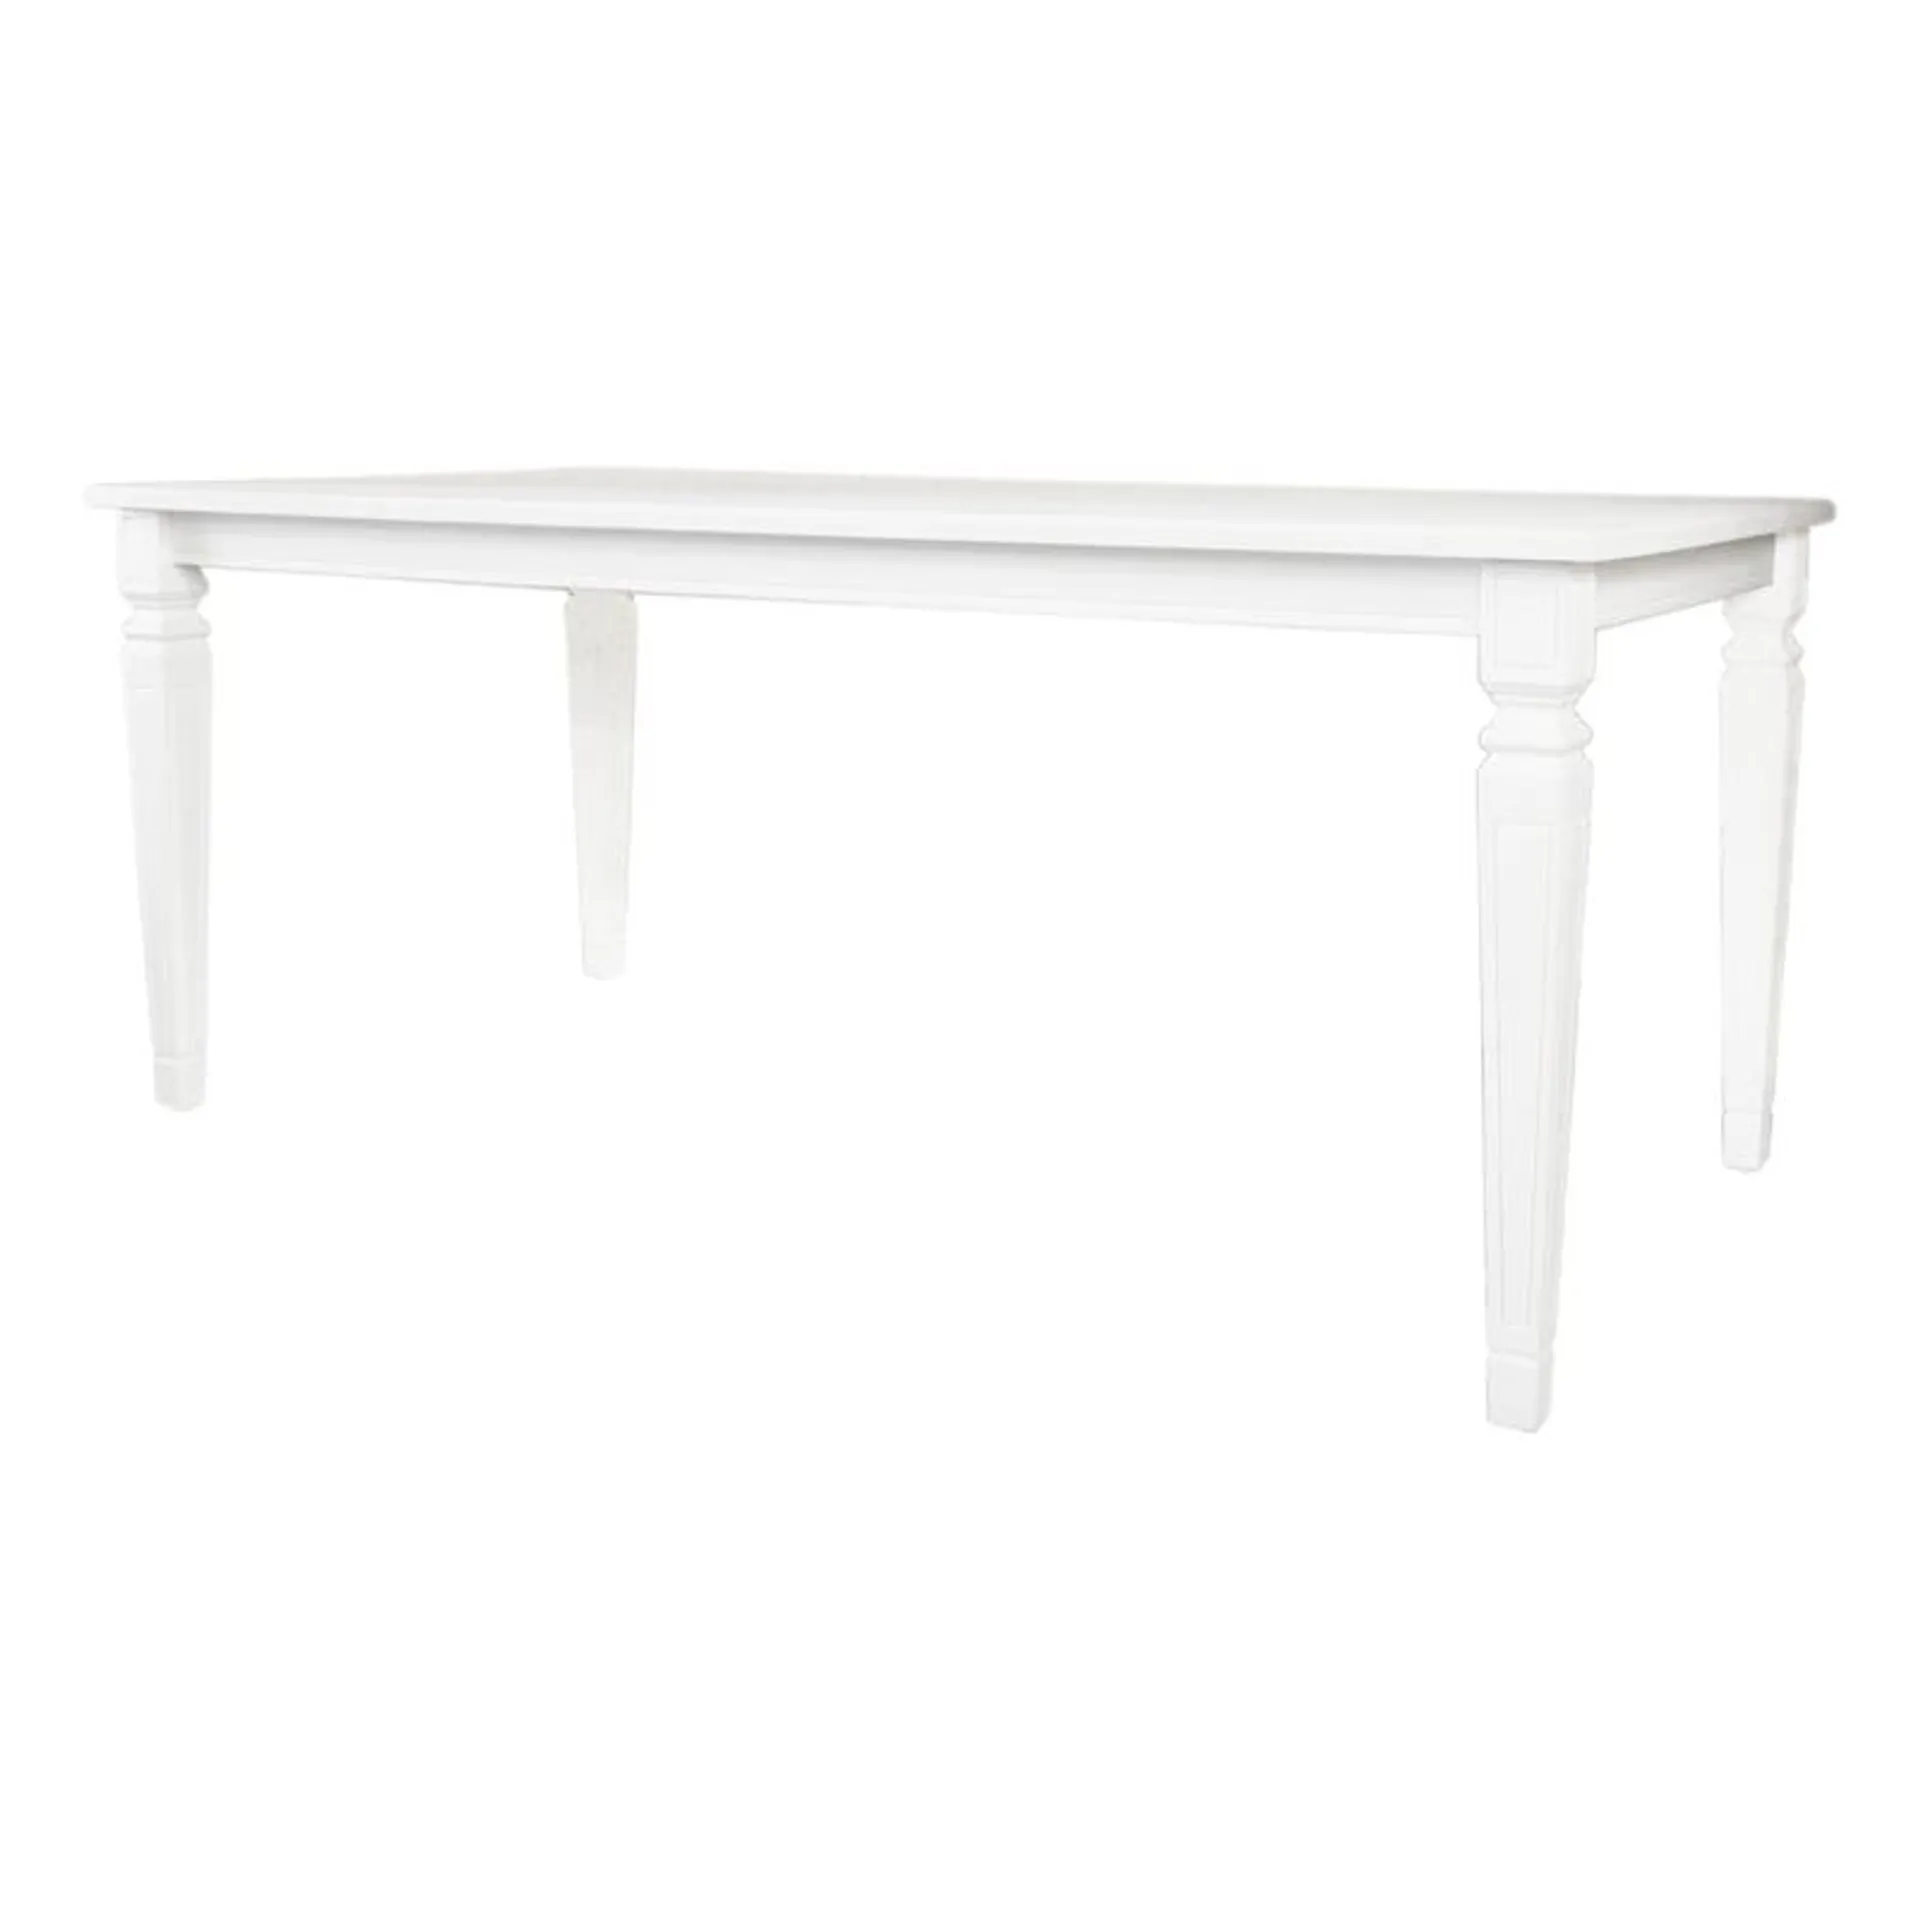 Grace Mitchell Cortana White Wooden Dining Table